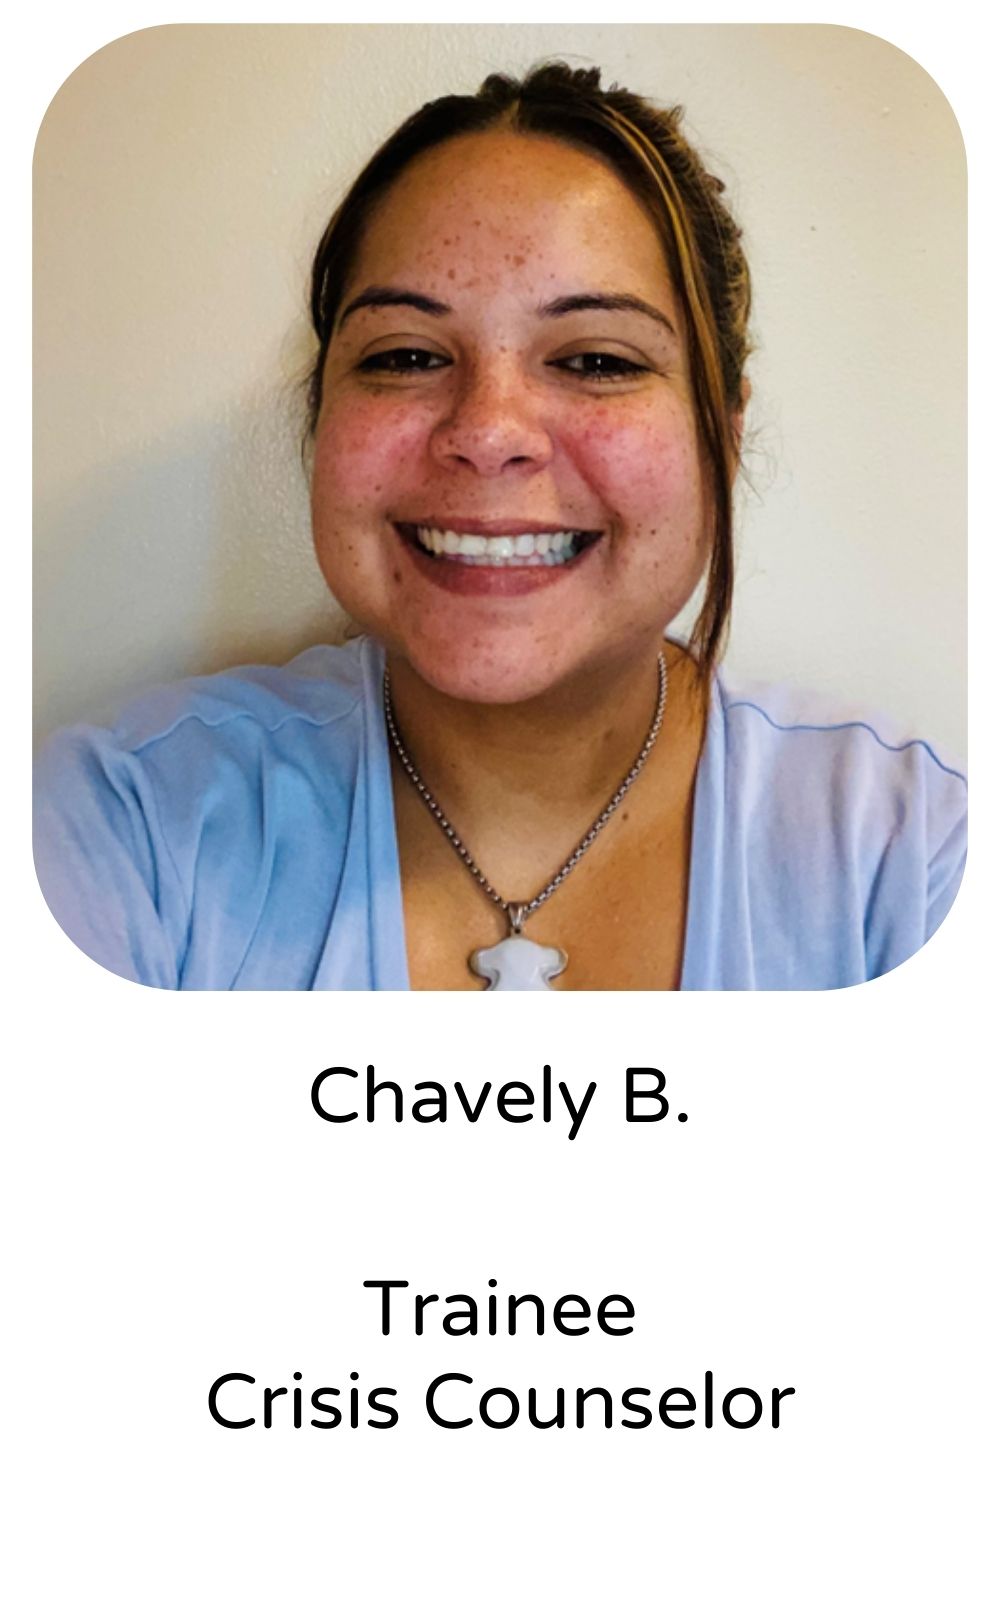 Chavely B, Trainee, Crisis Counselor